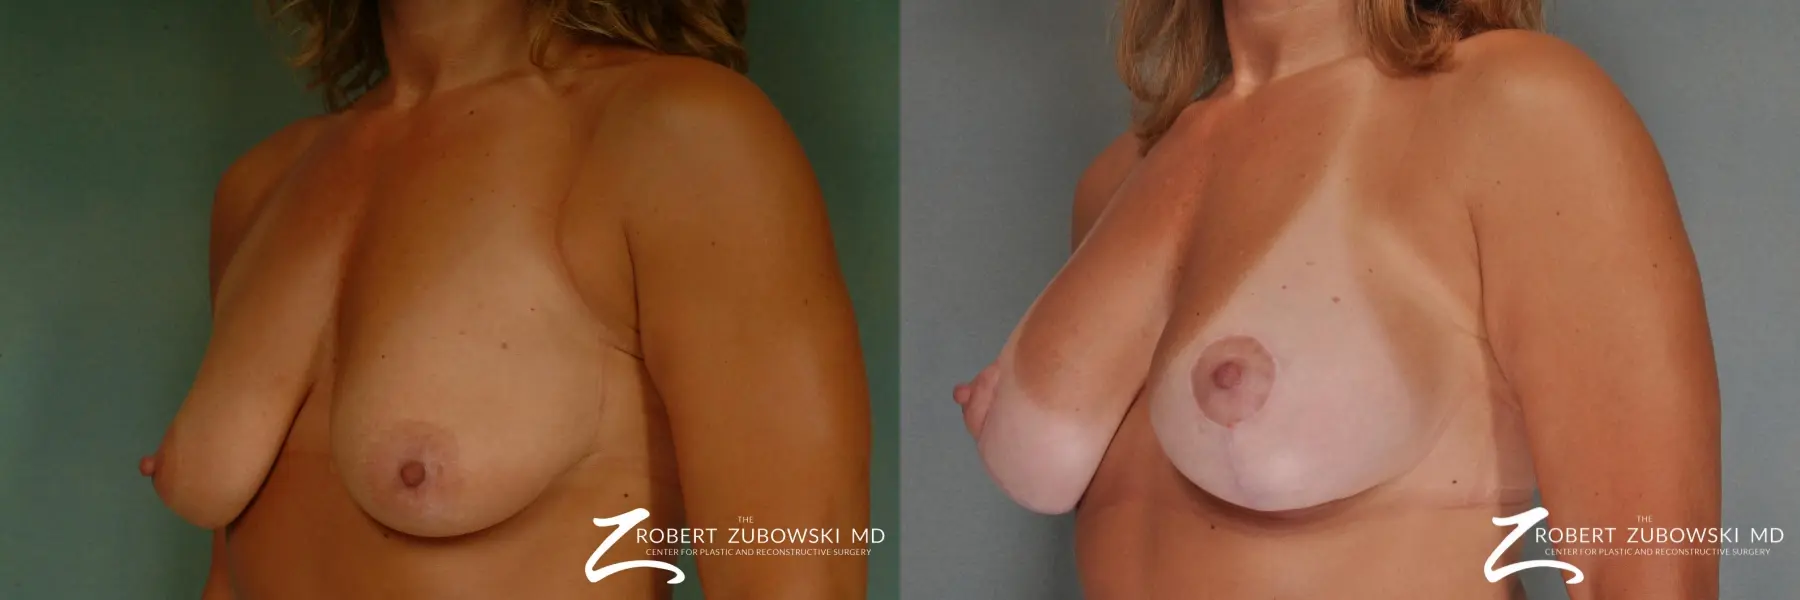 Breast Lift And Augmentation: Patient 5 - Before and After 2